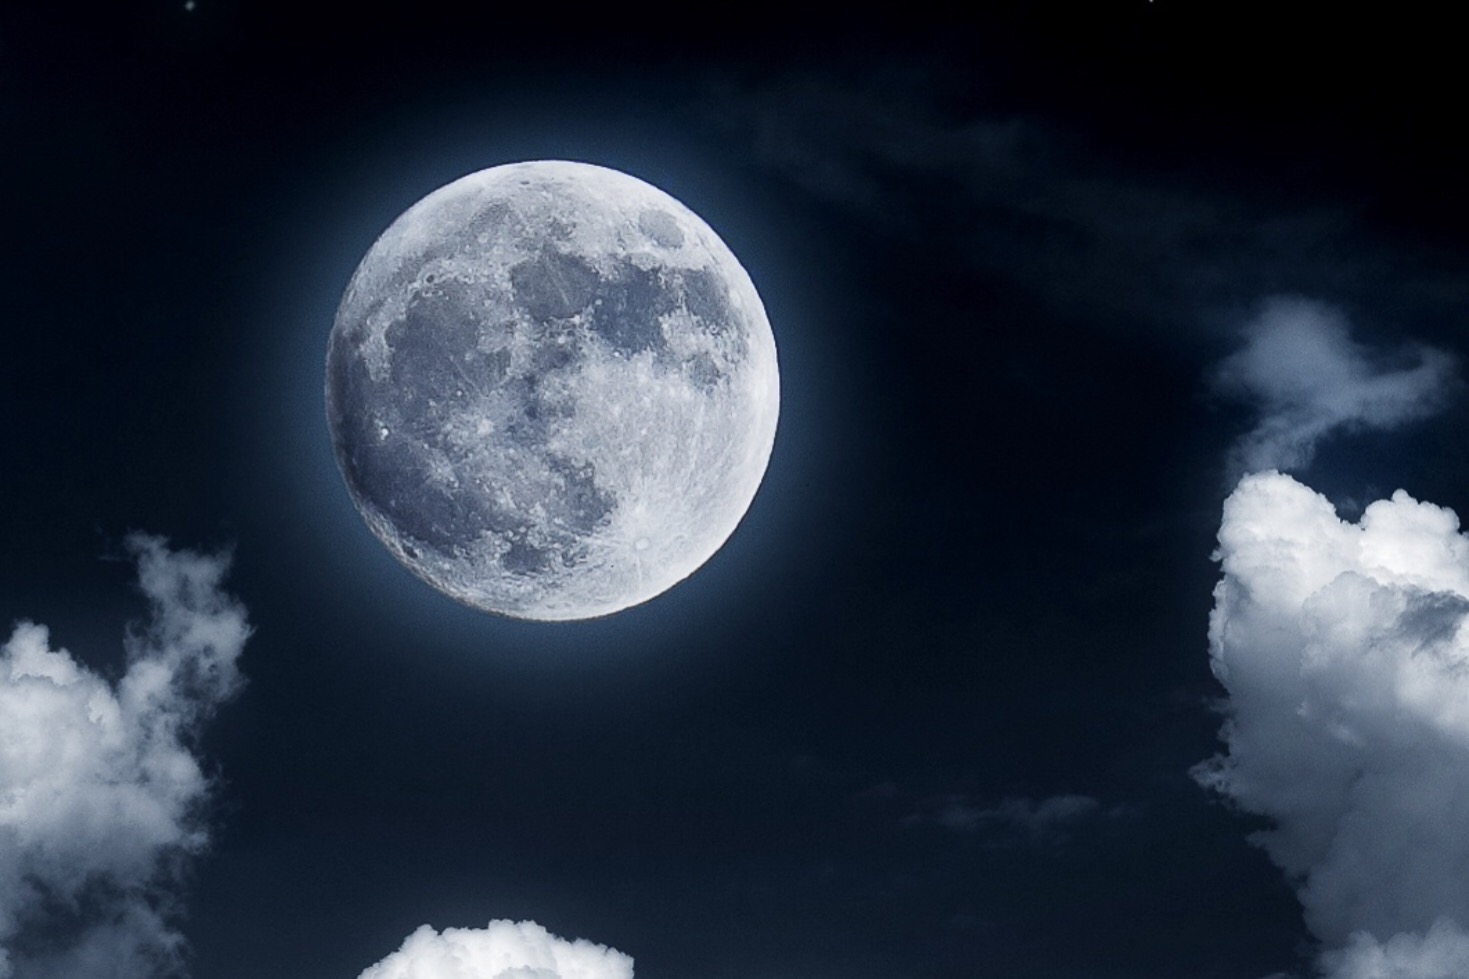 Homing moon. Картинка Луны 500 px. Crazy Moon. Memories · mond. Mind blowing pictures.